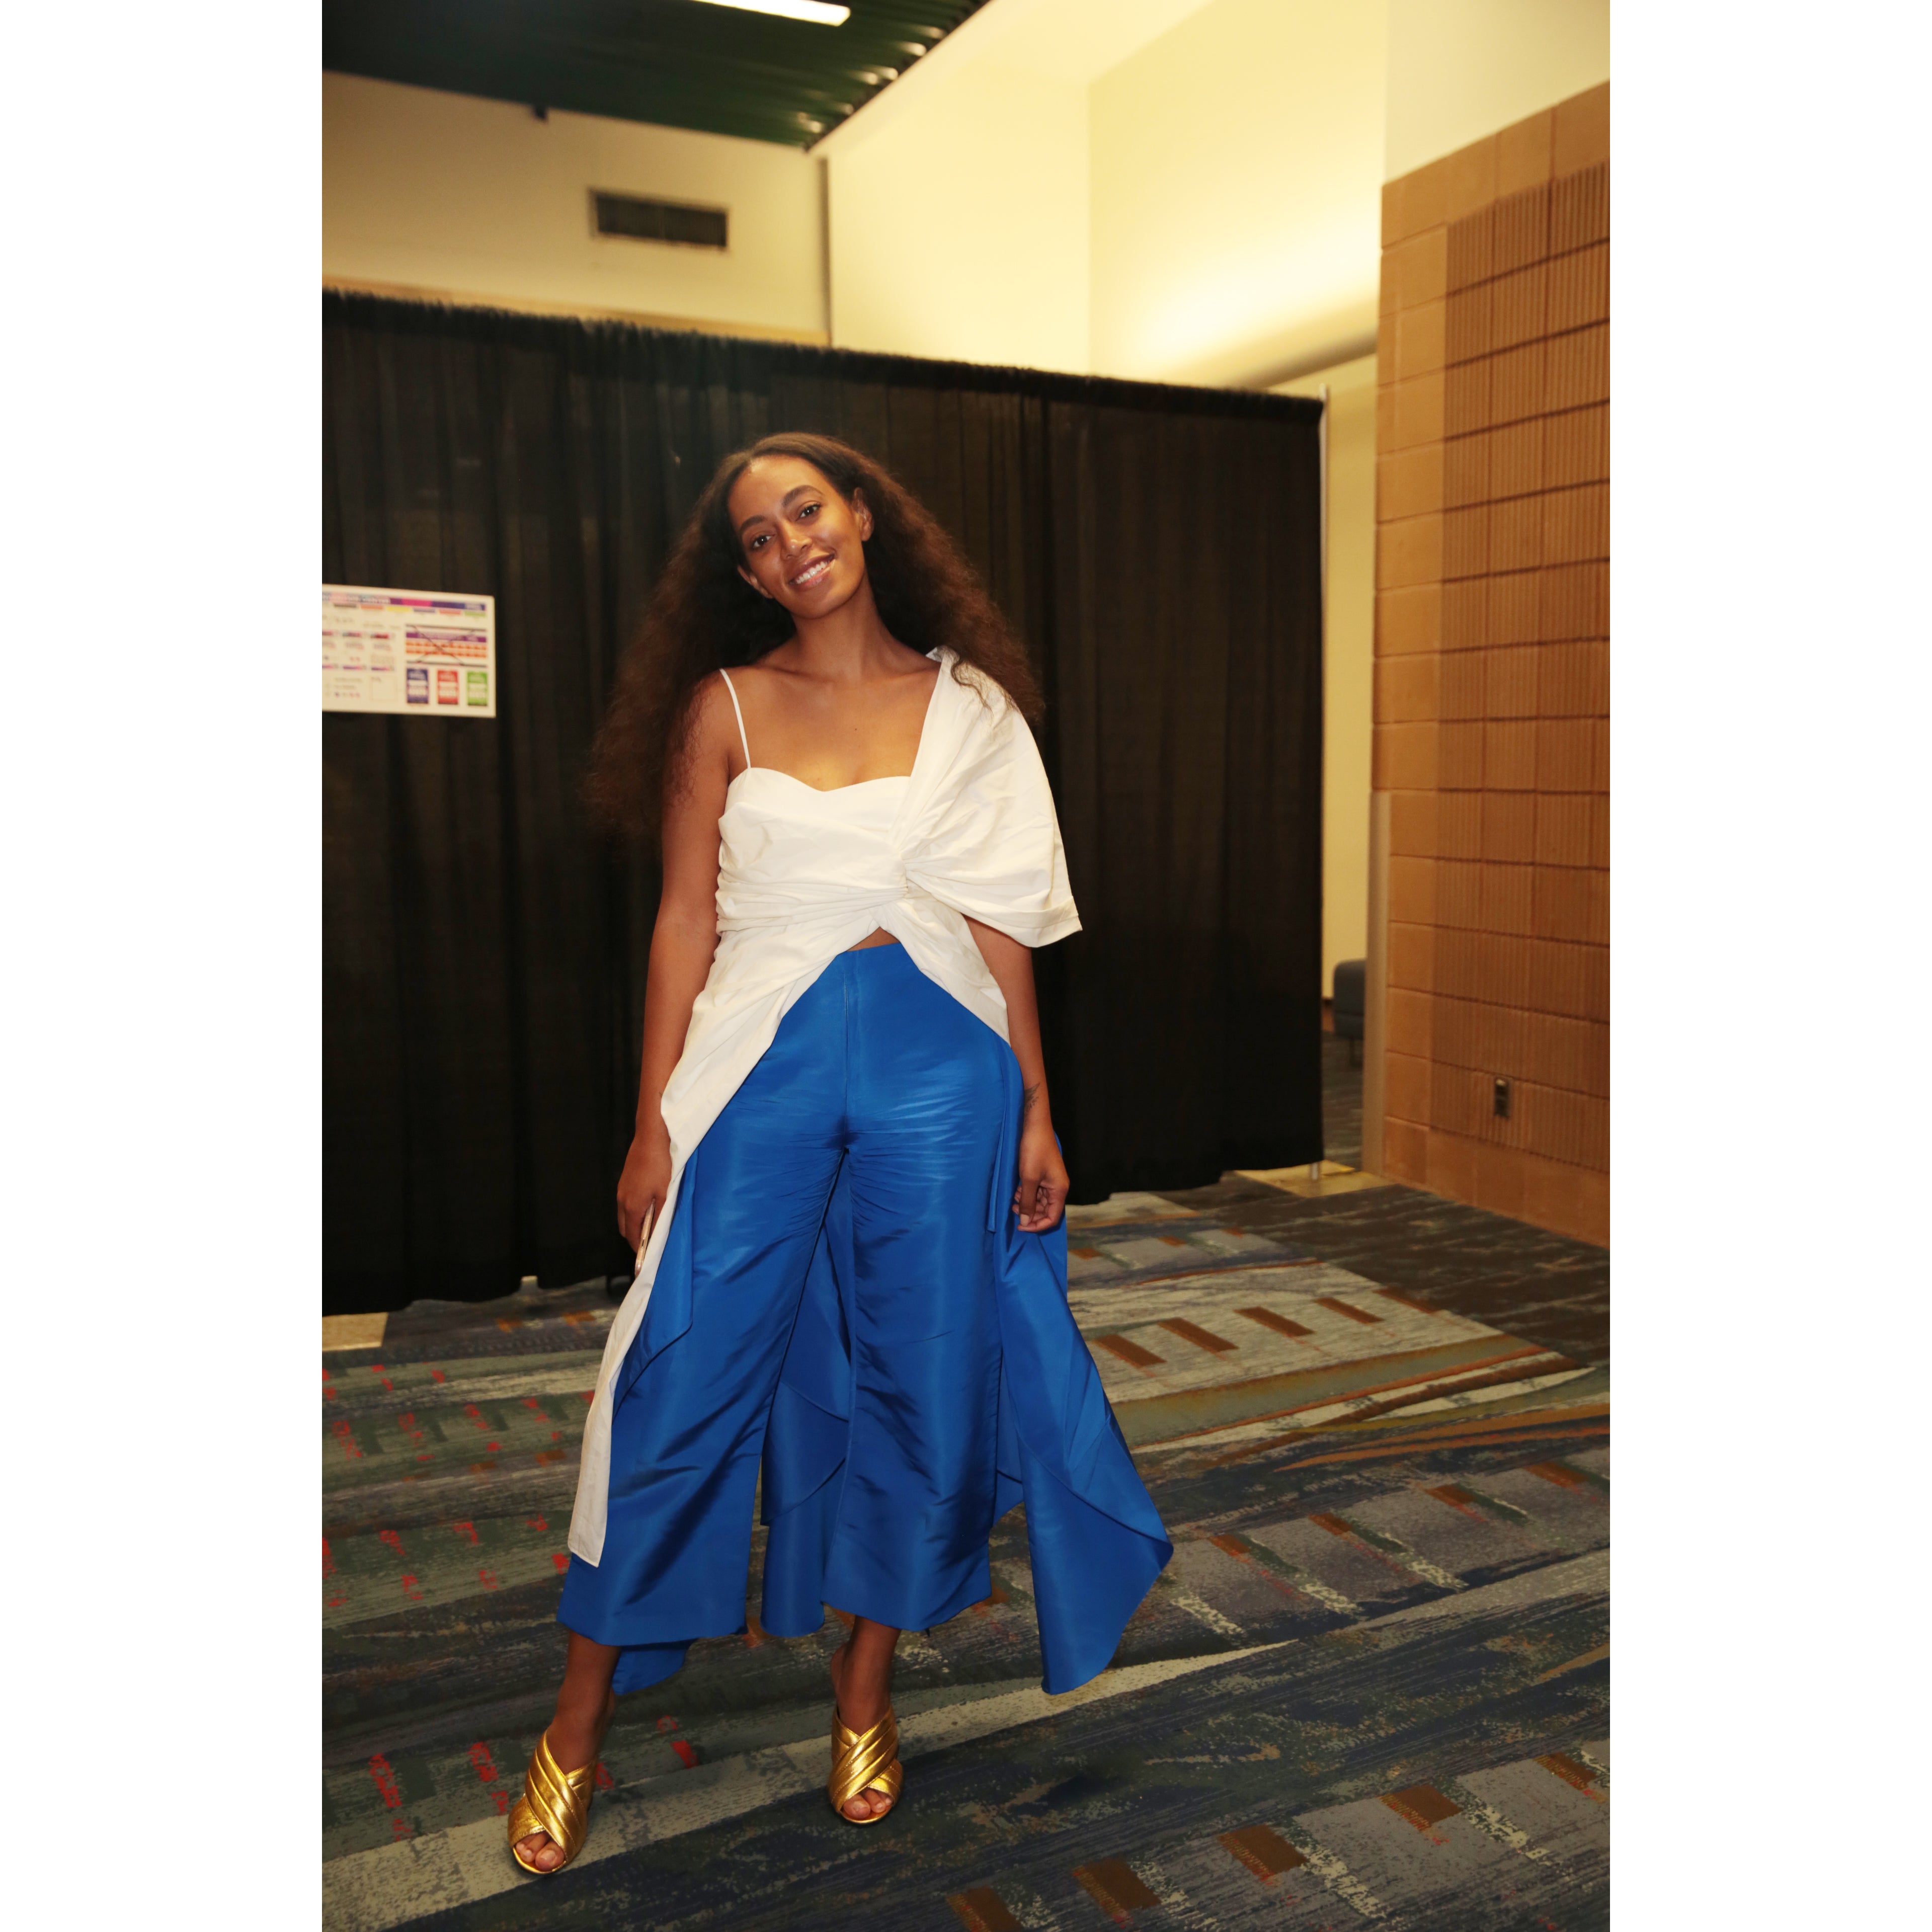 ESSENCE Festival Highlights: In Case You Missed It | Essence